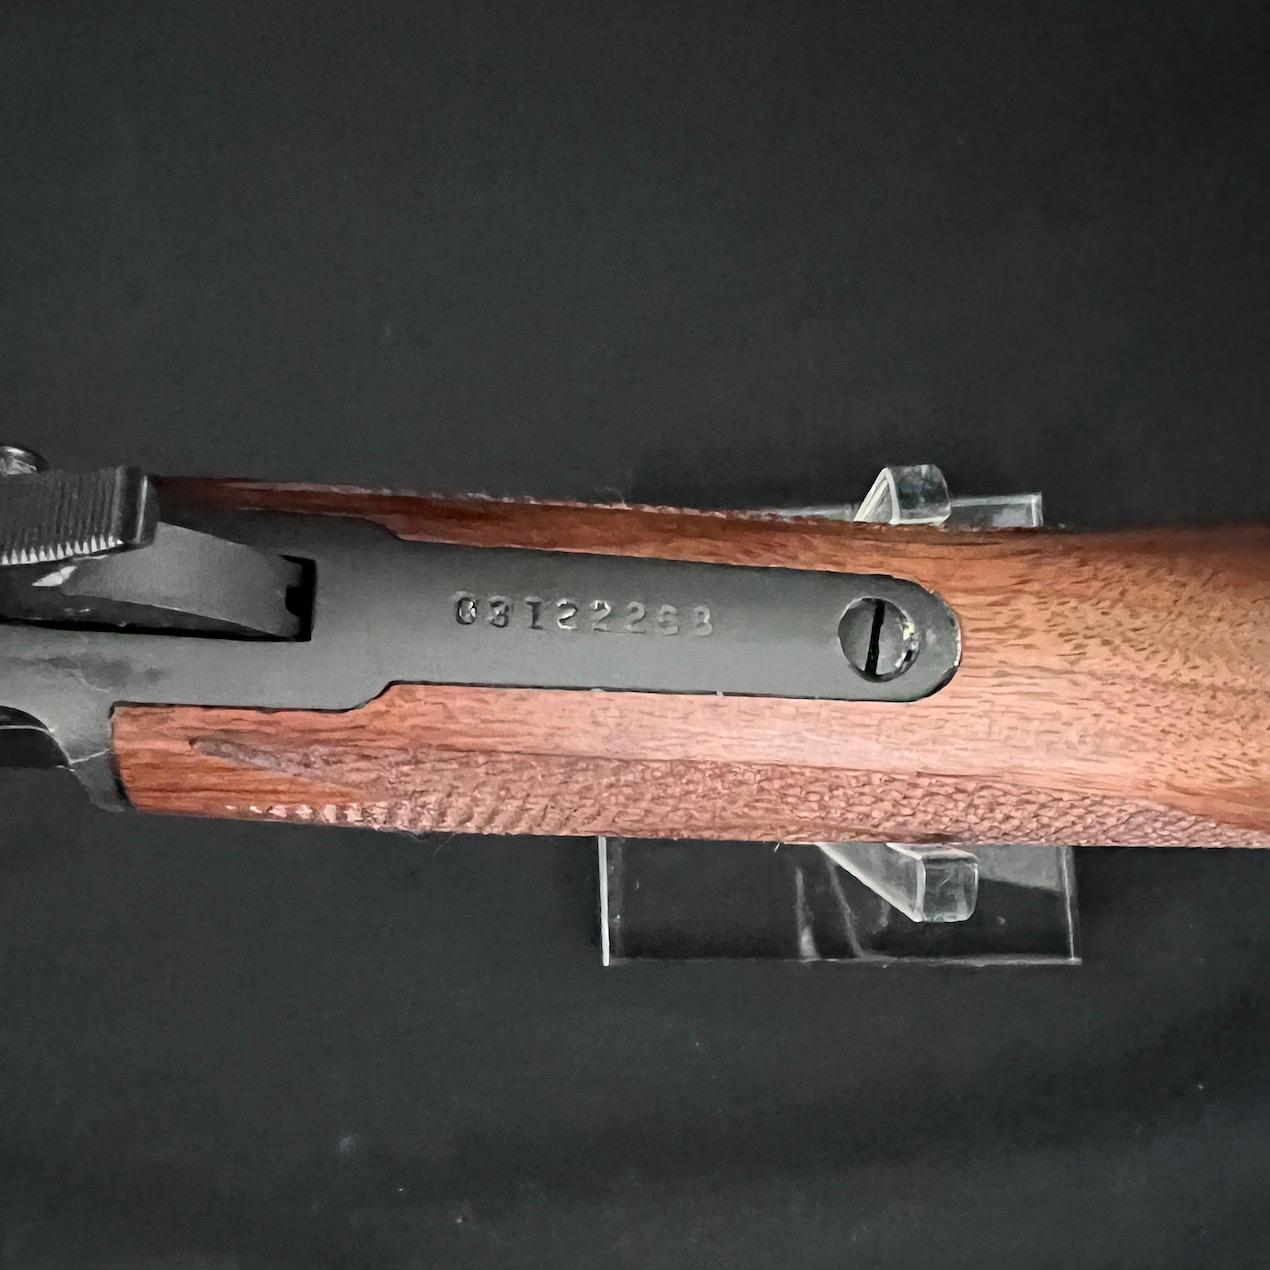 Marlin 39TDS Lever Action Rifle